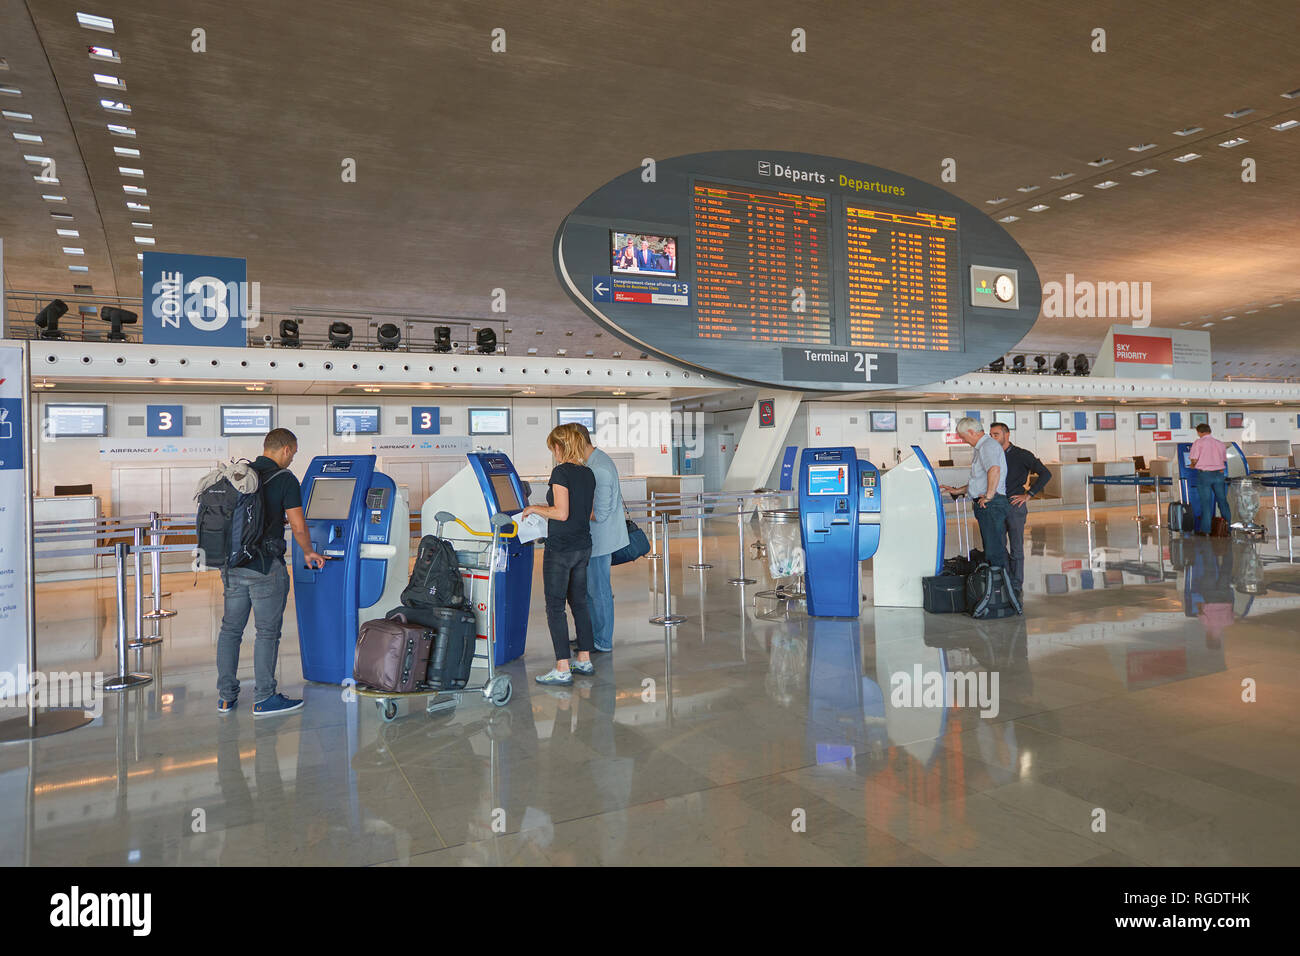 PARIS, FRANCE - CIRCA SEPTEMBER, 2014: inside Charles de Gaulle Airport. The airport is the largest international airport in France. Stock Photo